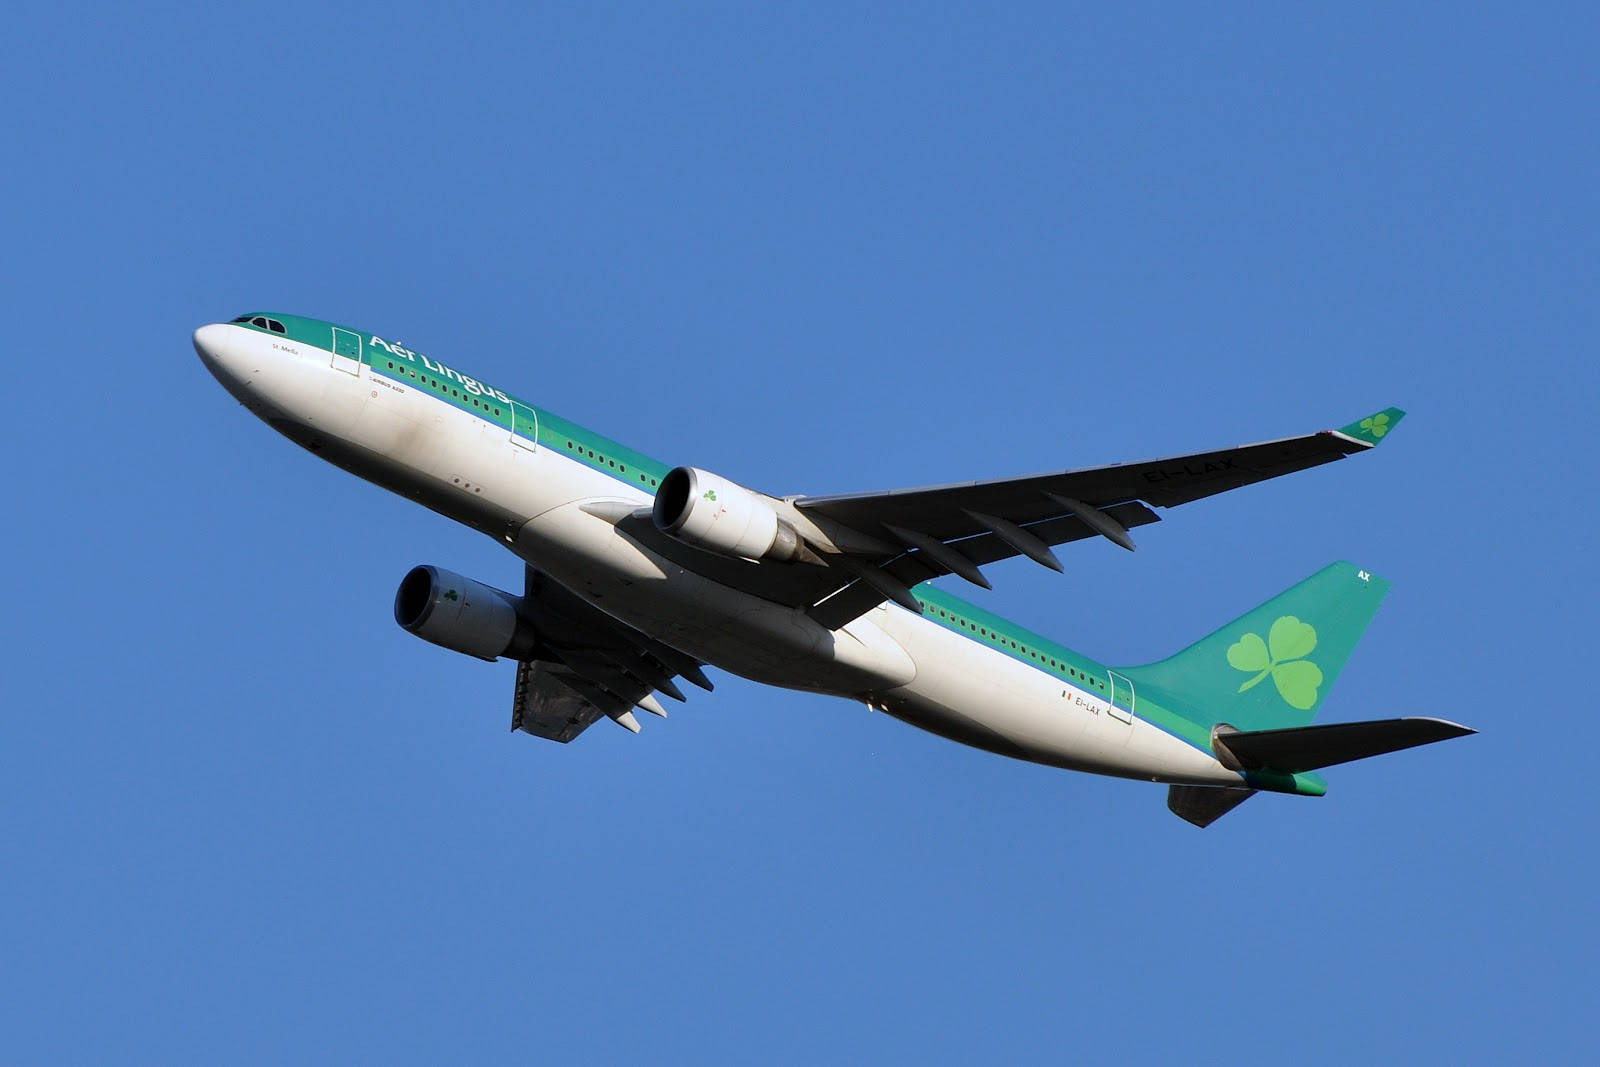 Gliding Aer Lingus Airplane Picture